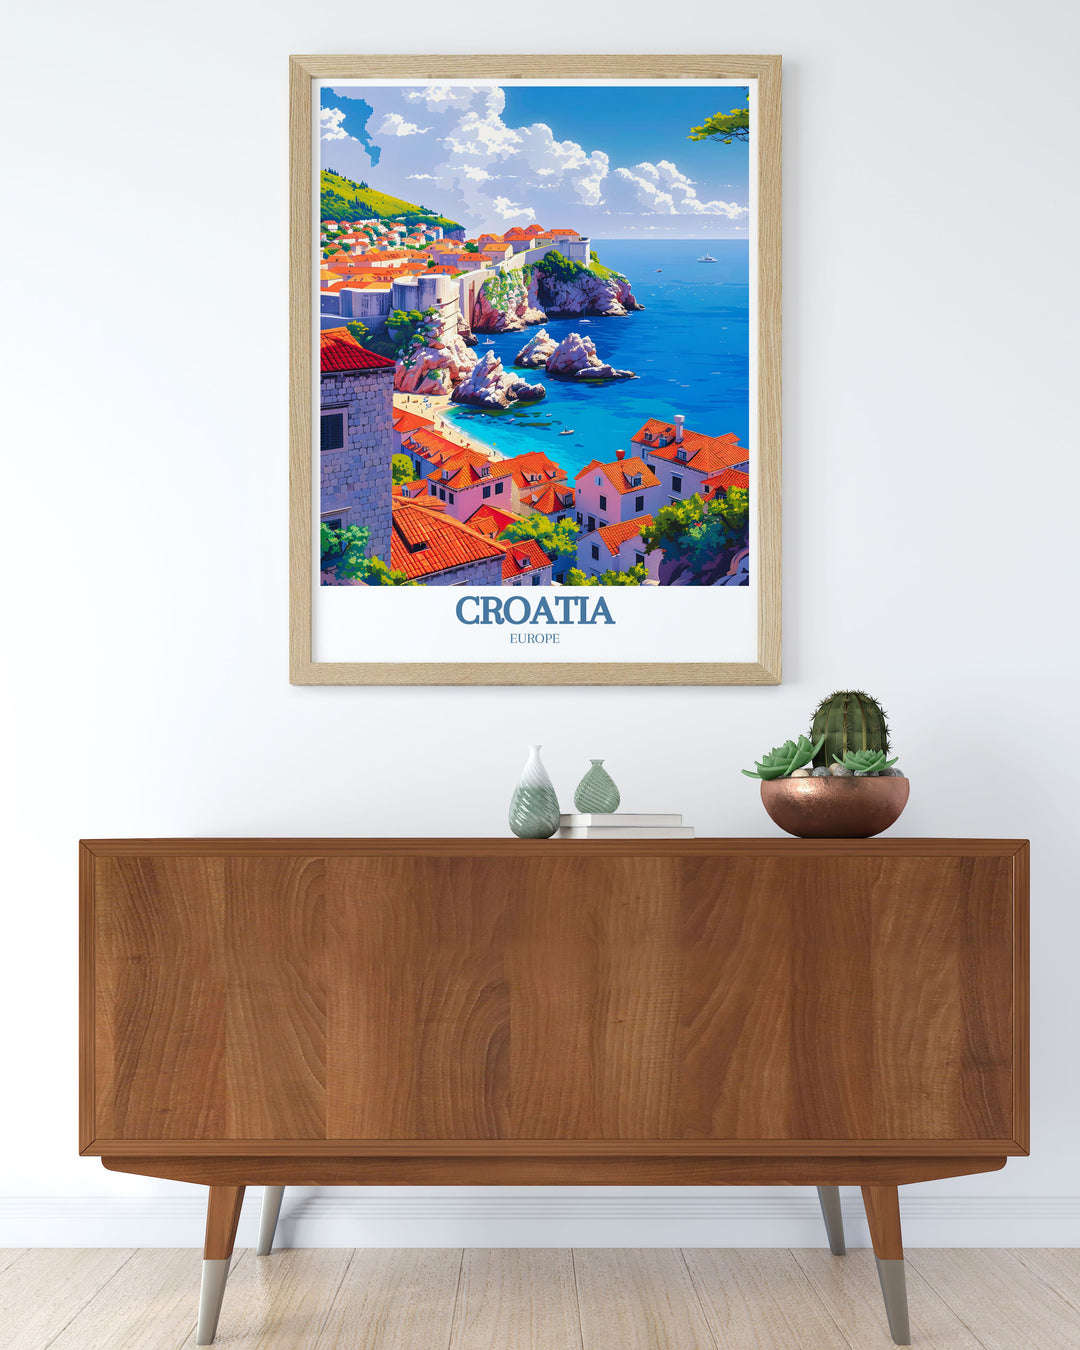 This poster artfully depicts the natural beauty of the Adriatic Sea and the historic landscapes of Dubrovnik Old Town, offering a perfect blend of Croatias coastal and cultural landmarks for your decor.